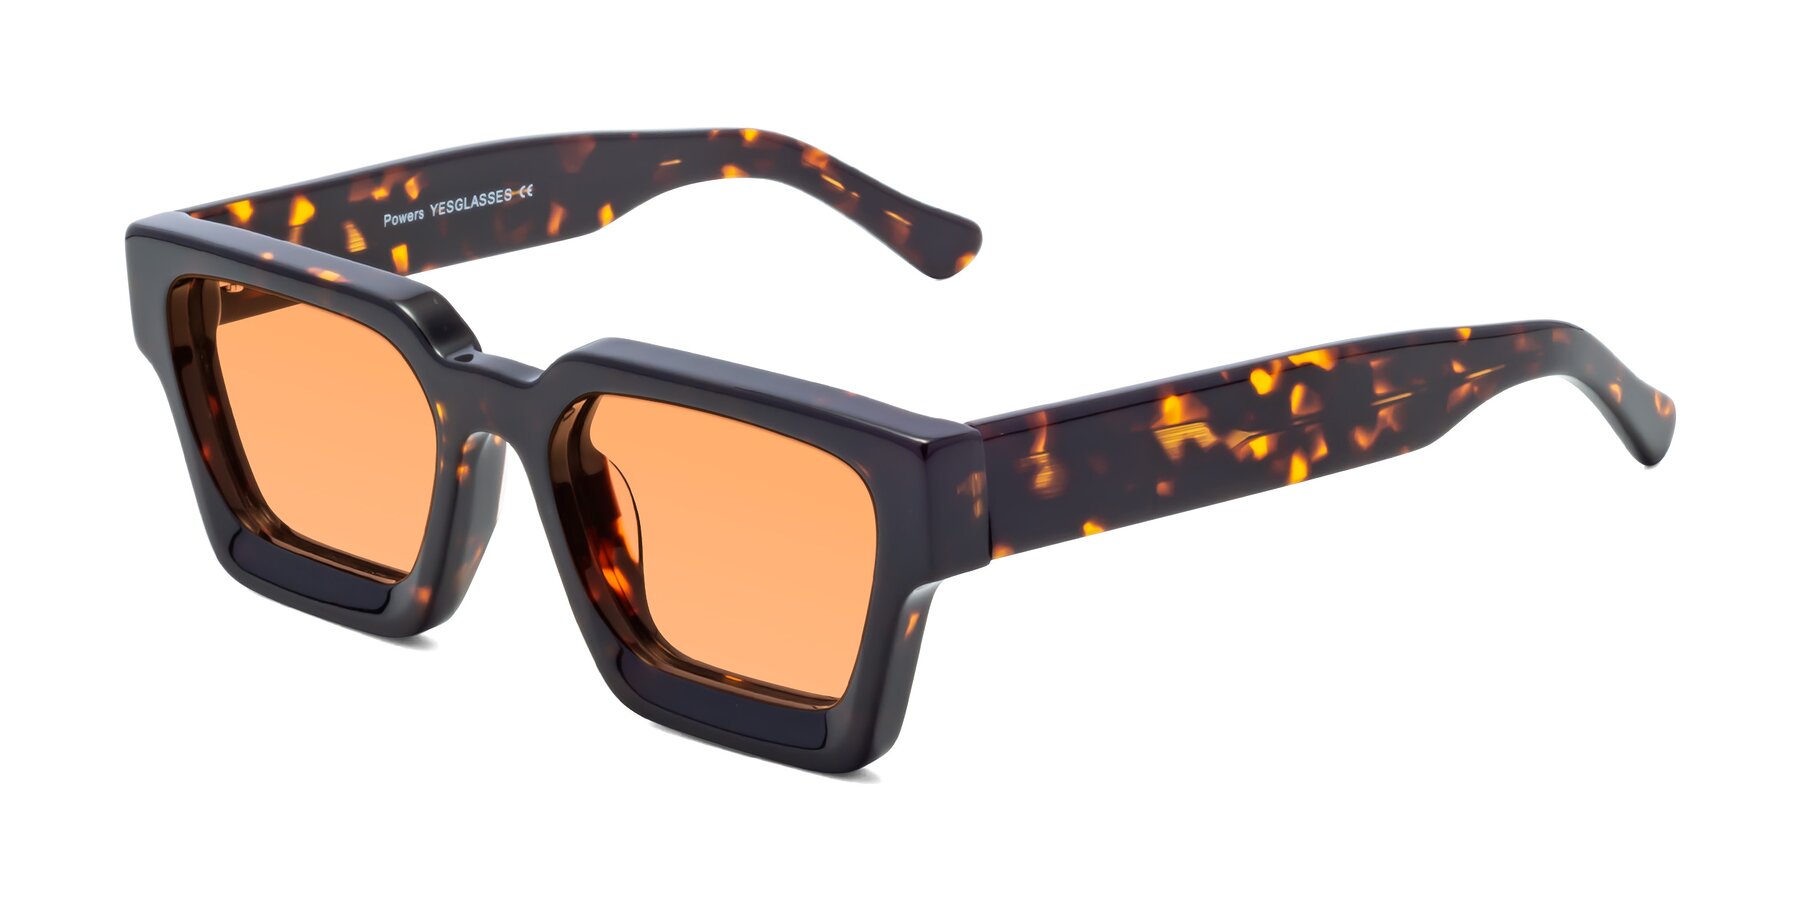 Angle of Powers in Tortoise with Medium Orange Tinted Lenses